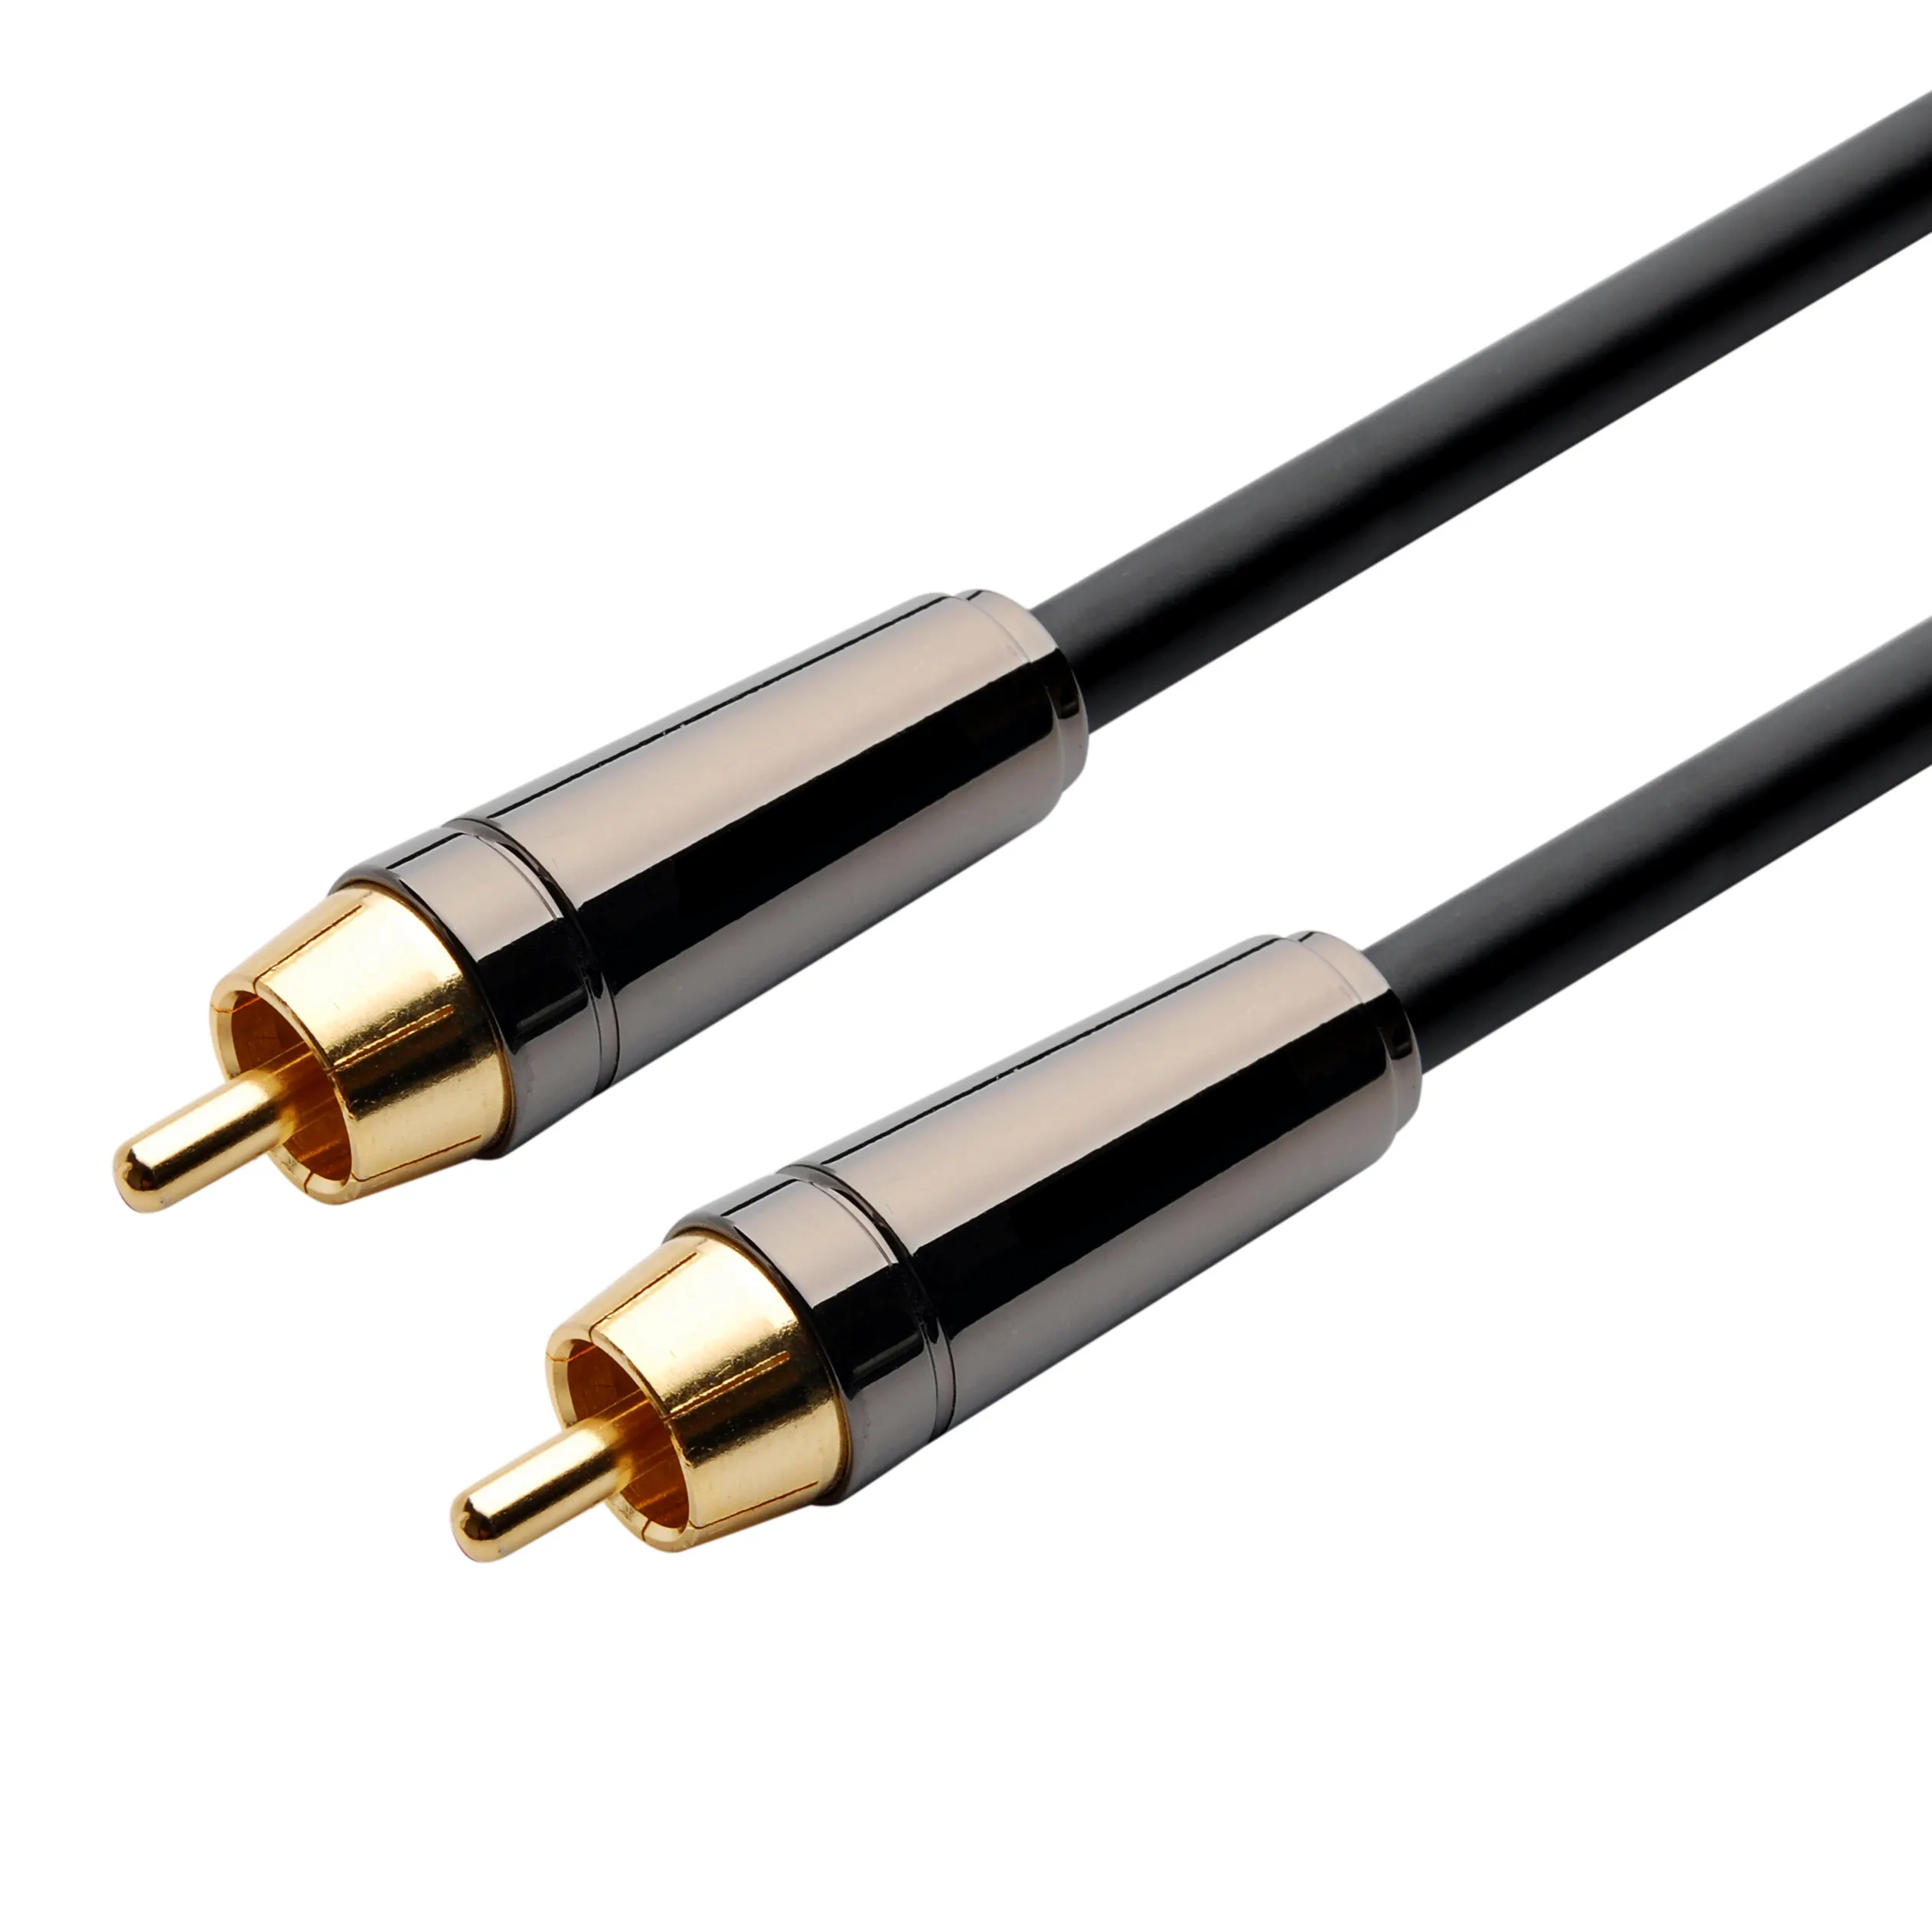 1 2 3 5 meter high end quality video audio rca cables av/rca to male hifi signal kabel coaxial cabl cabel rca digital coaxial